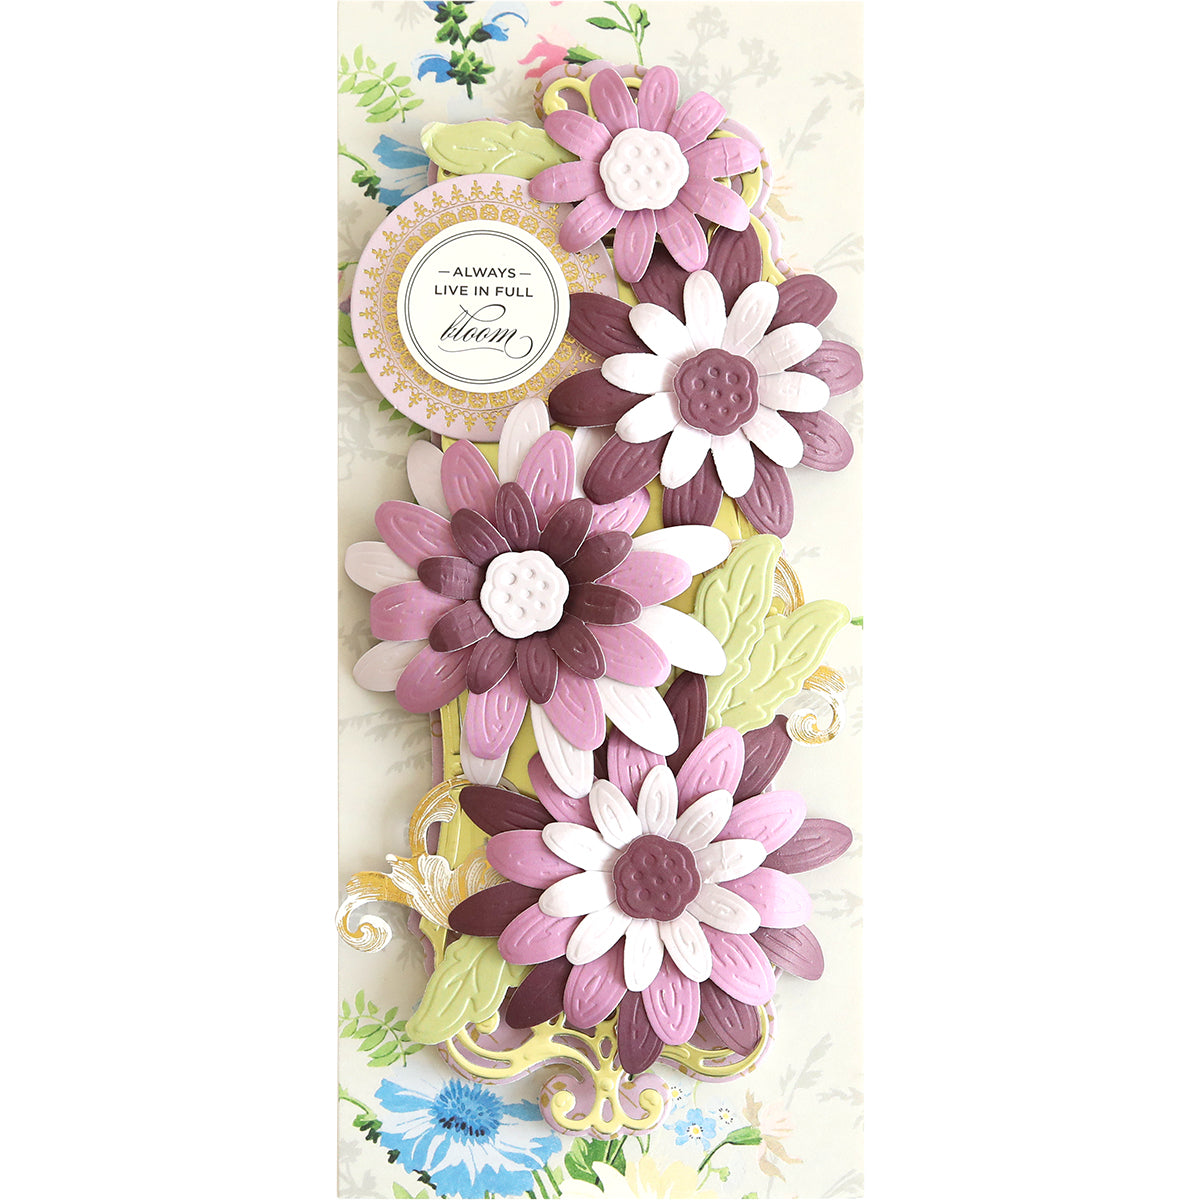 A Slimline Flower Cut and Emboss Folders card with purple and white flowers on it.